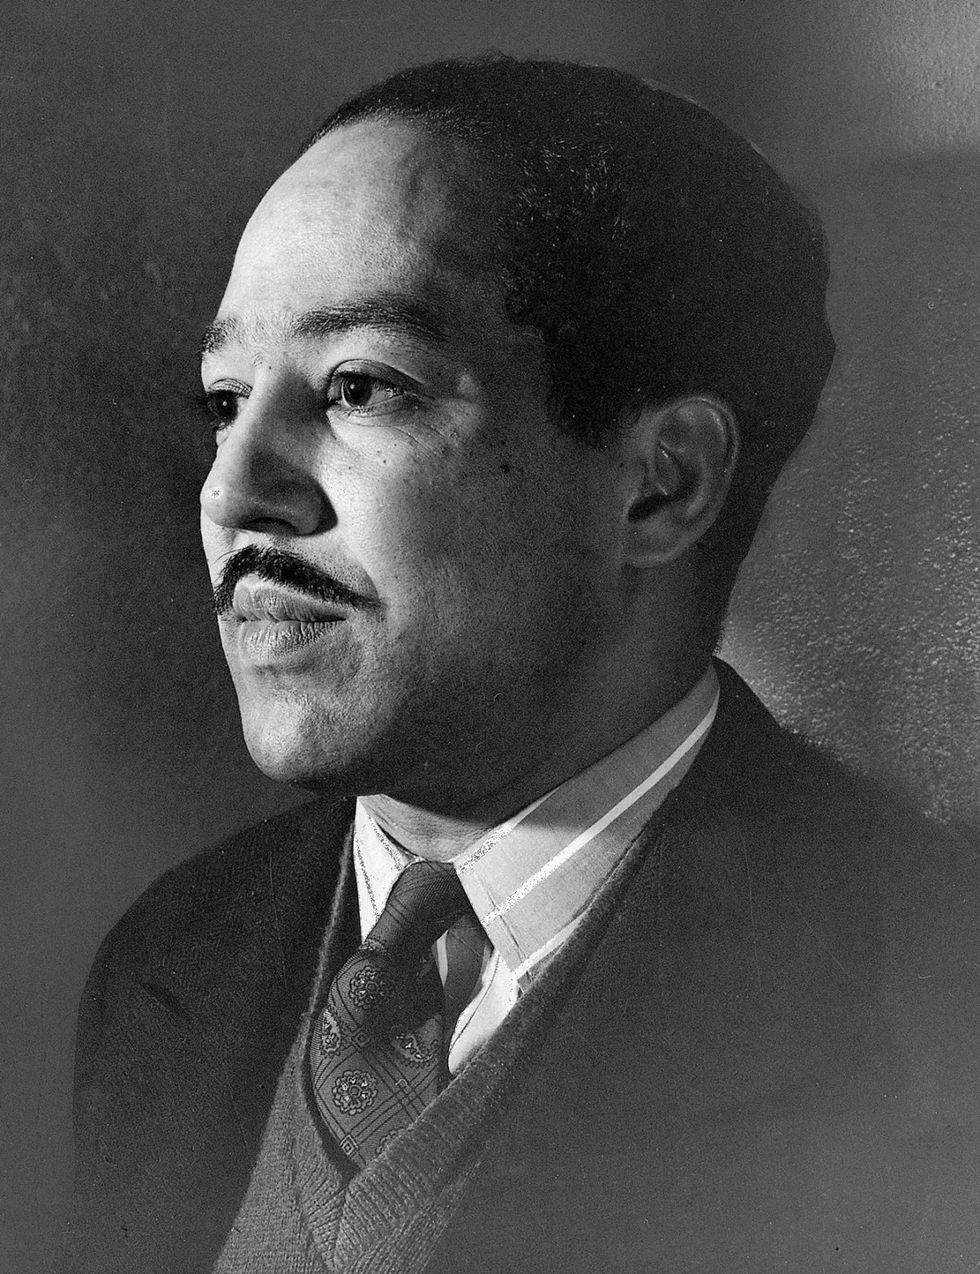 Who was langston hughes